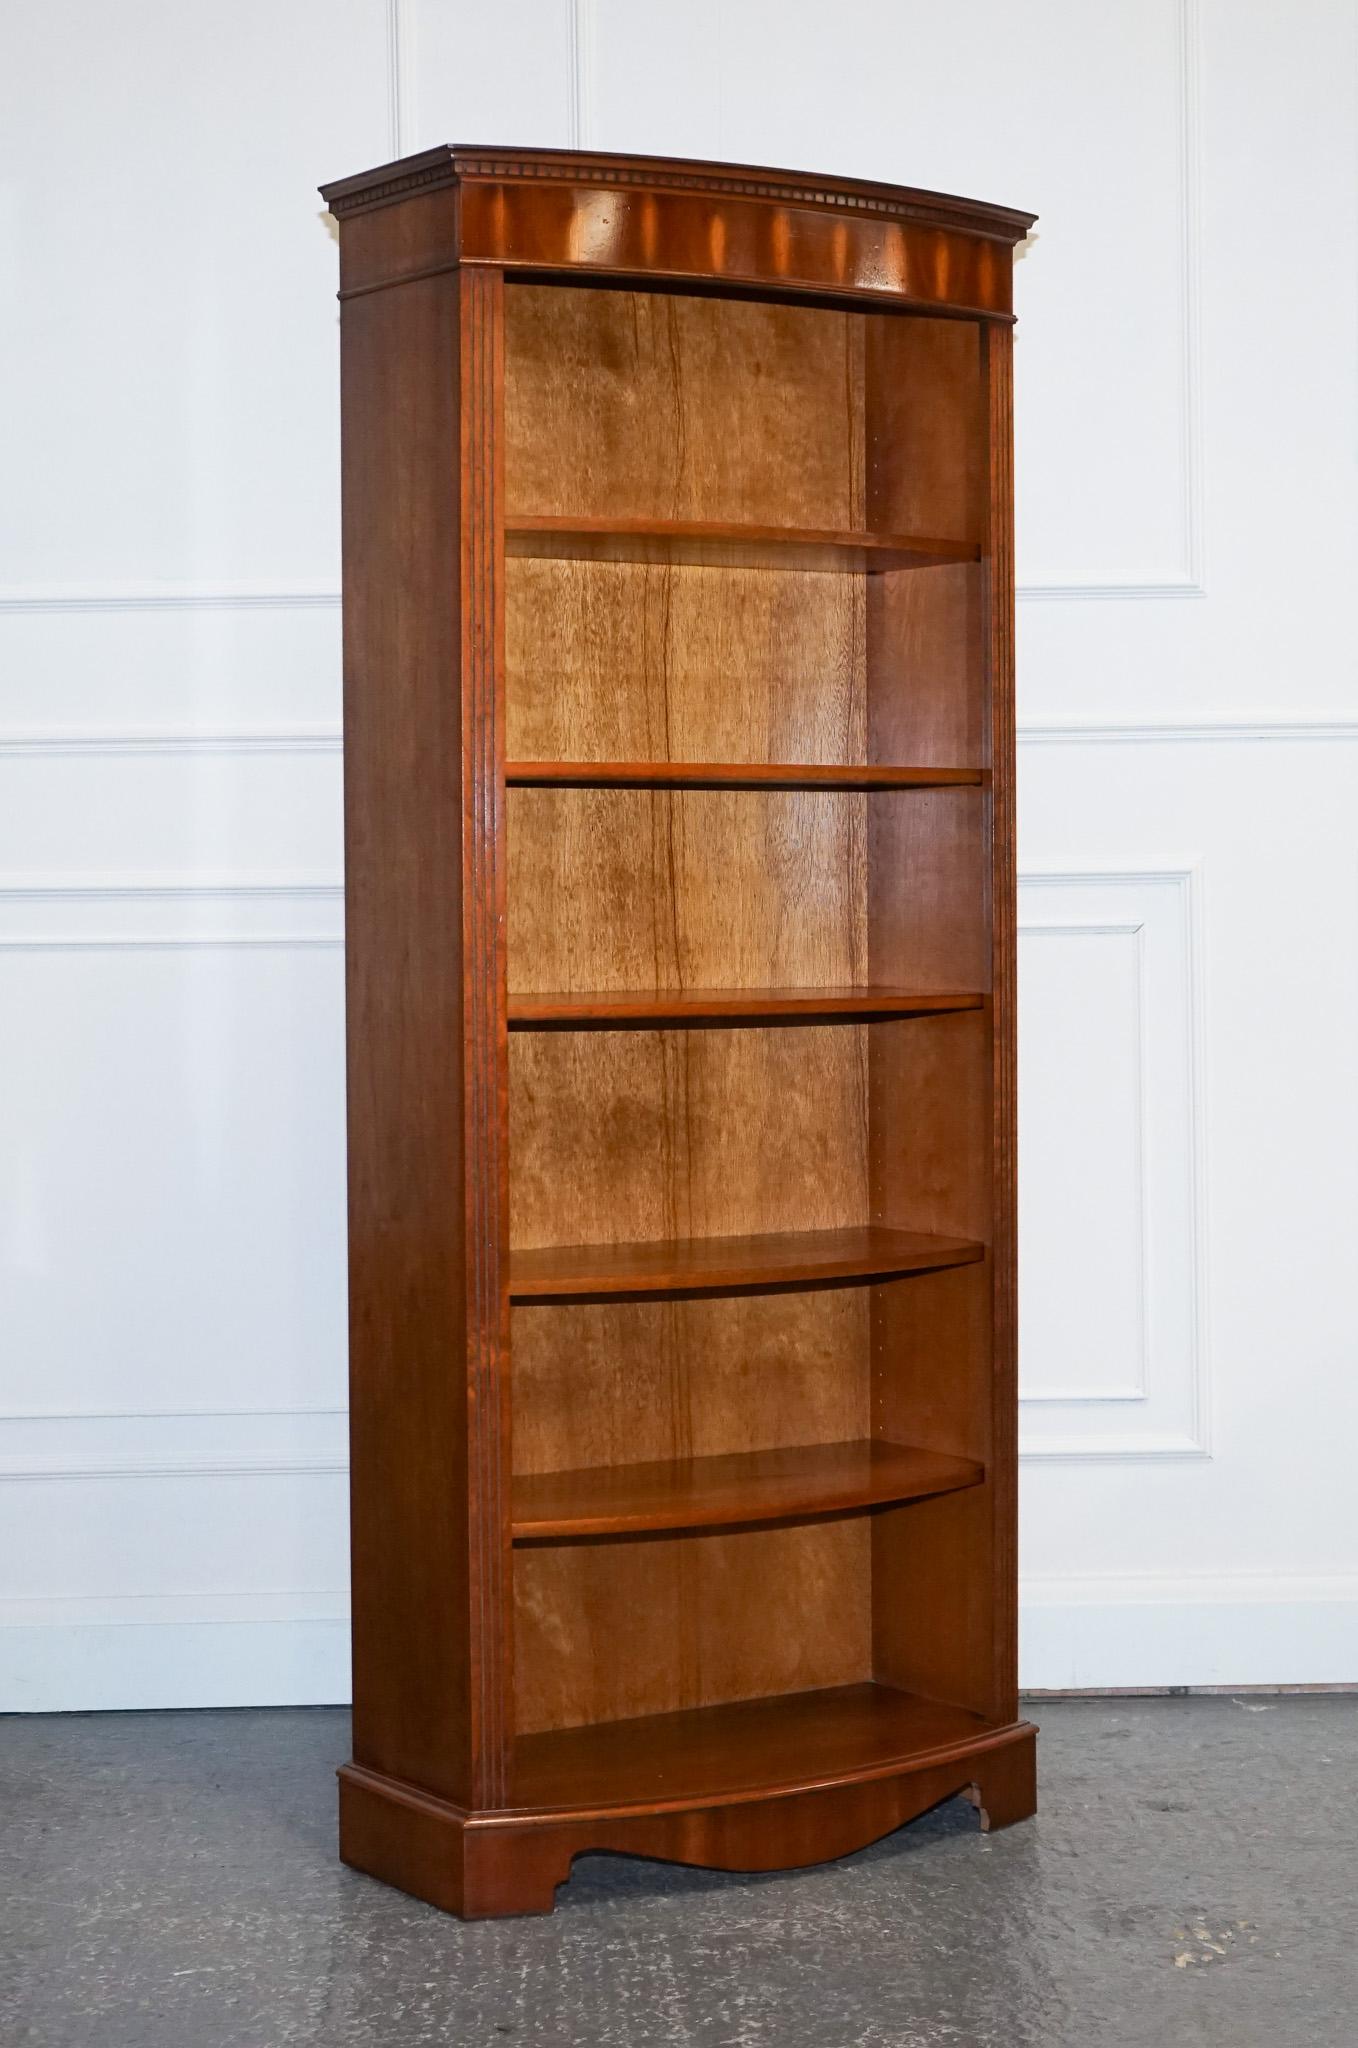 We are delighted to offer for sale this Lovely Open Yew Wood Bookcase.

The bookcase has a simple yet functional design with five adjustable shelves that provide ample storage space for books, collectibles, or other decorative items. The shelves